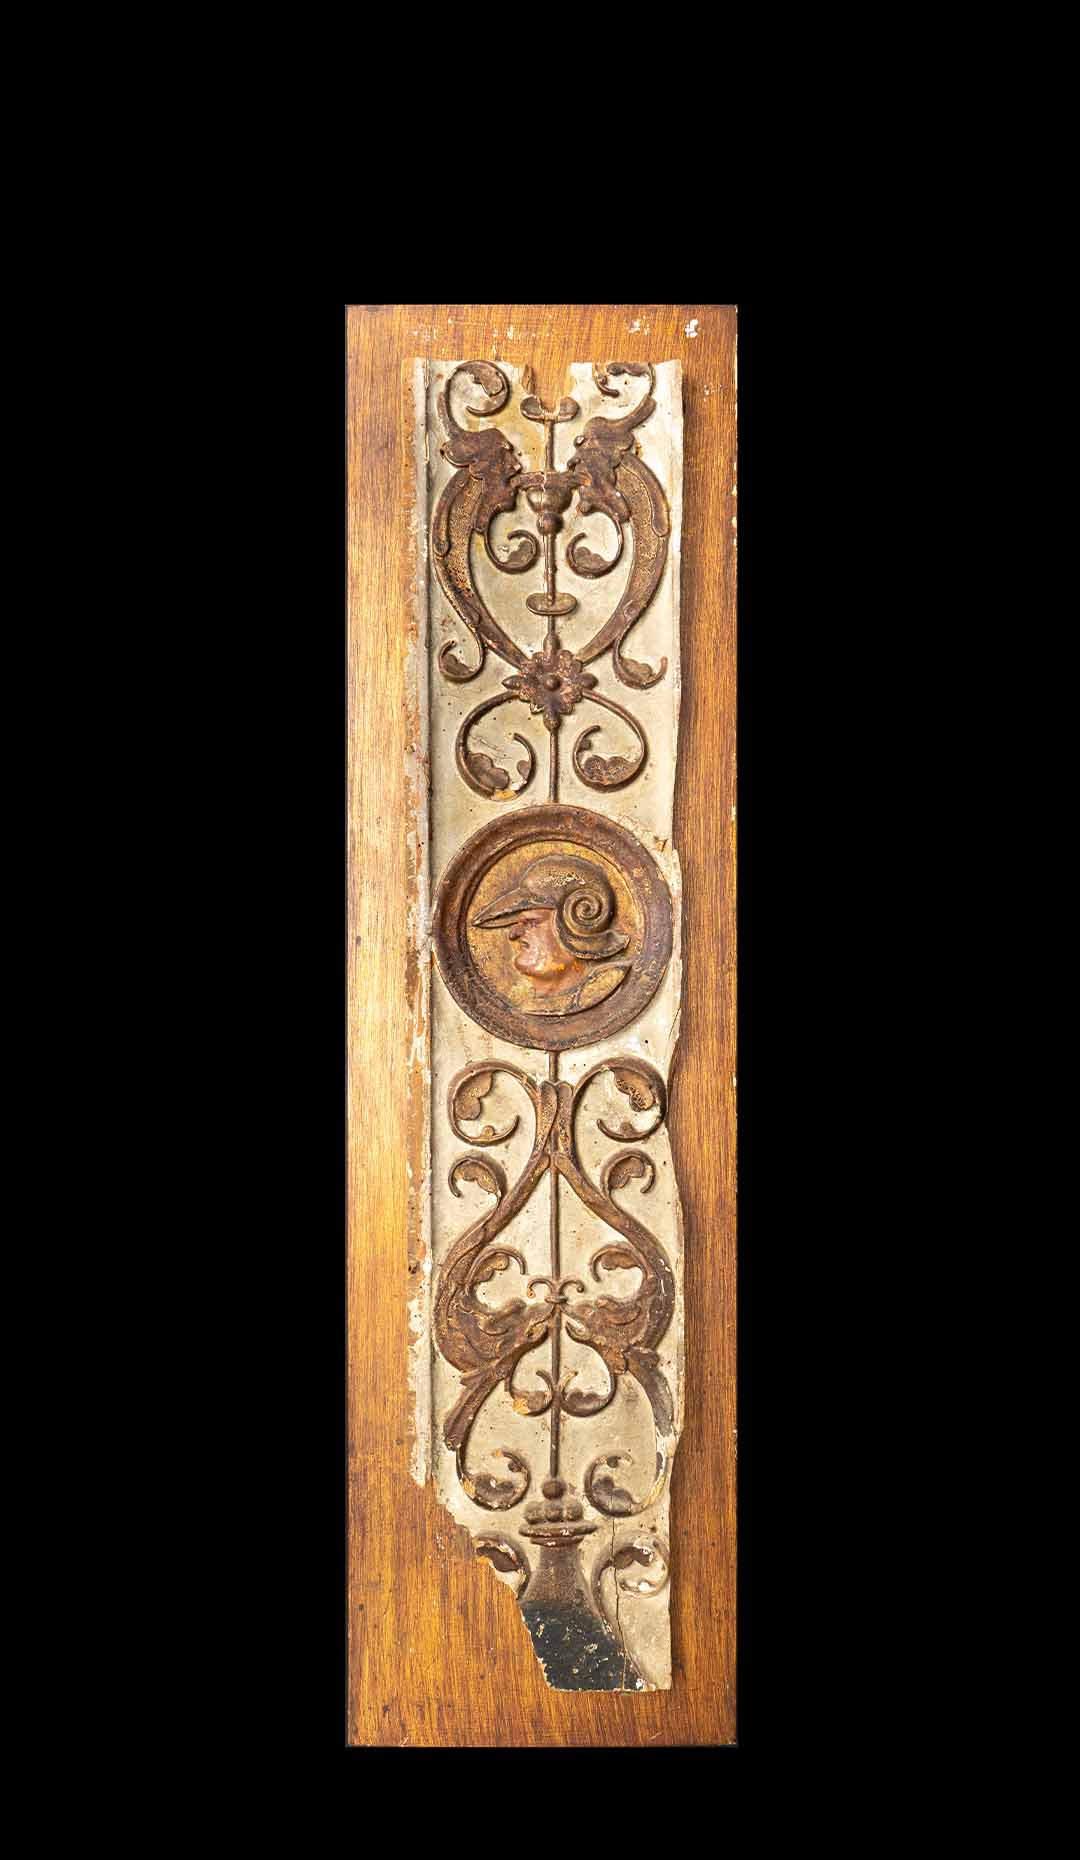 Wooden Polychrome Panel From the 18th Century